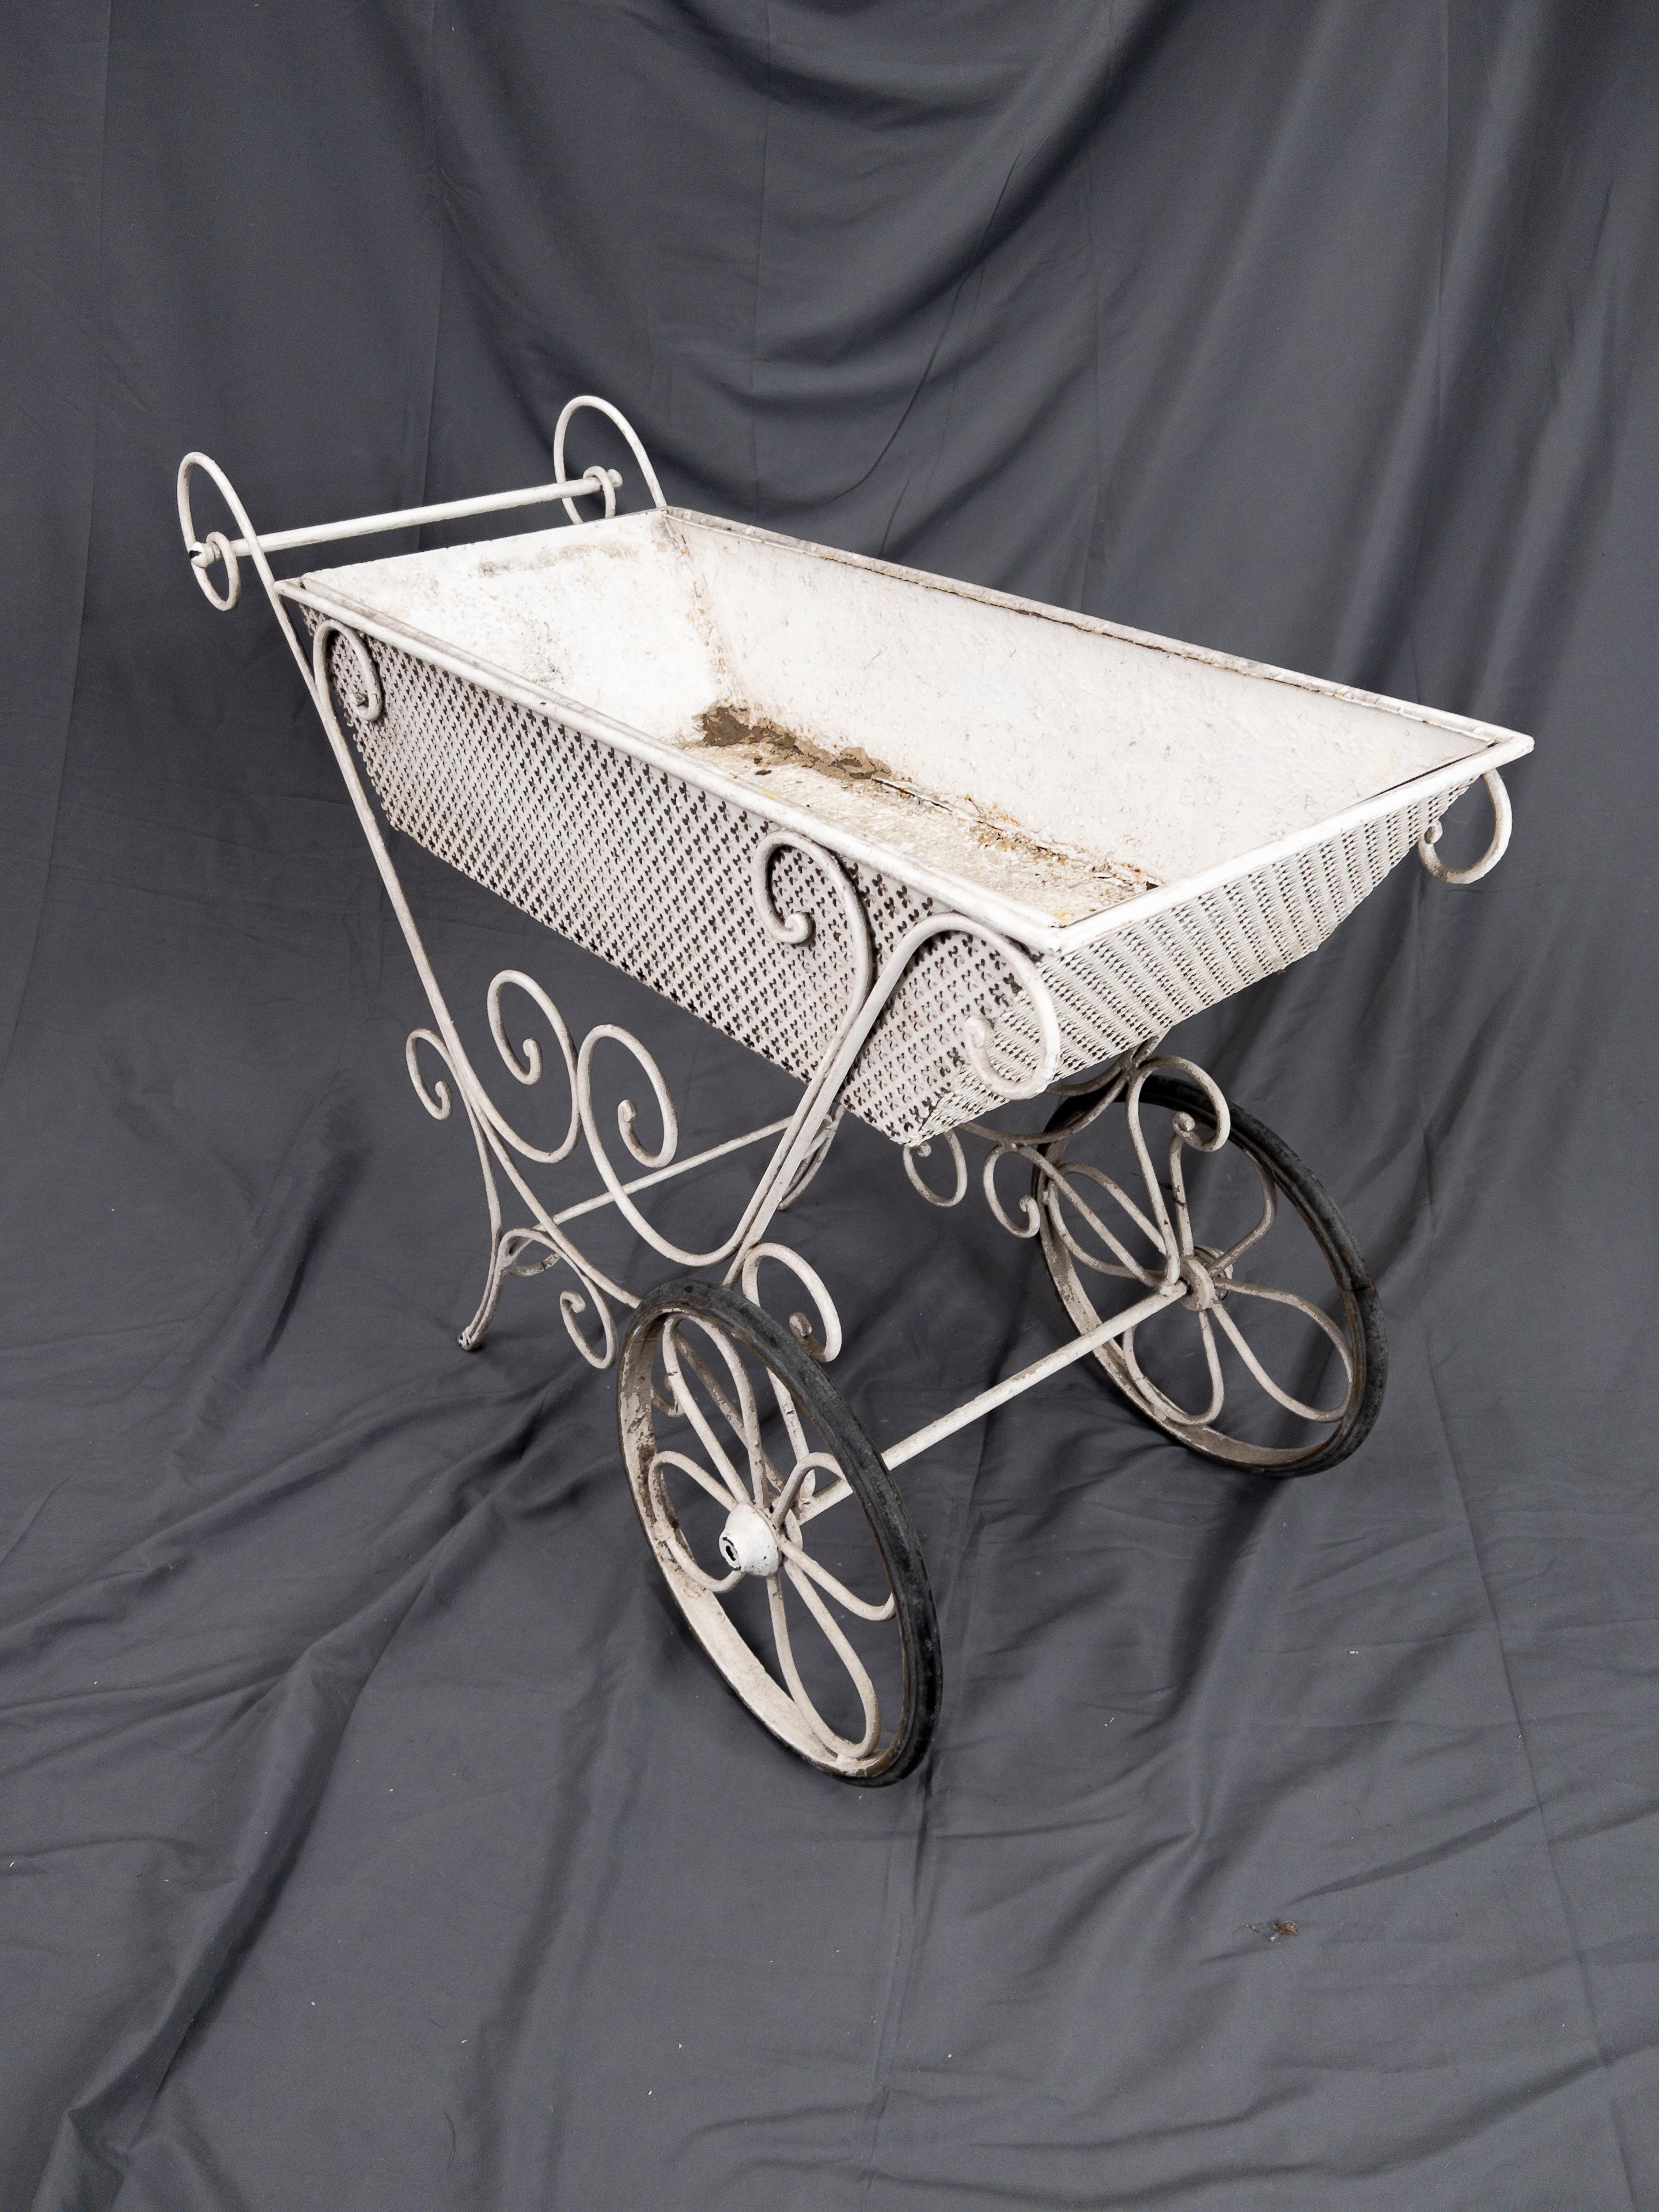 Metal French garden cart. This is a white painted metal garden cart, previously used to hold plants and other garden necessities.